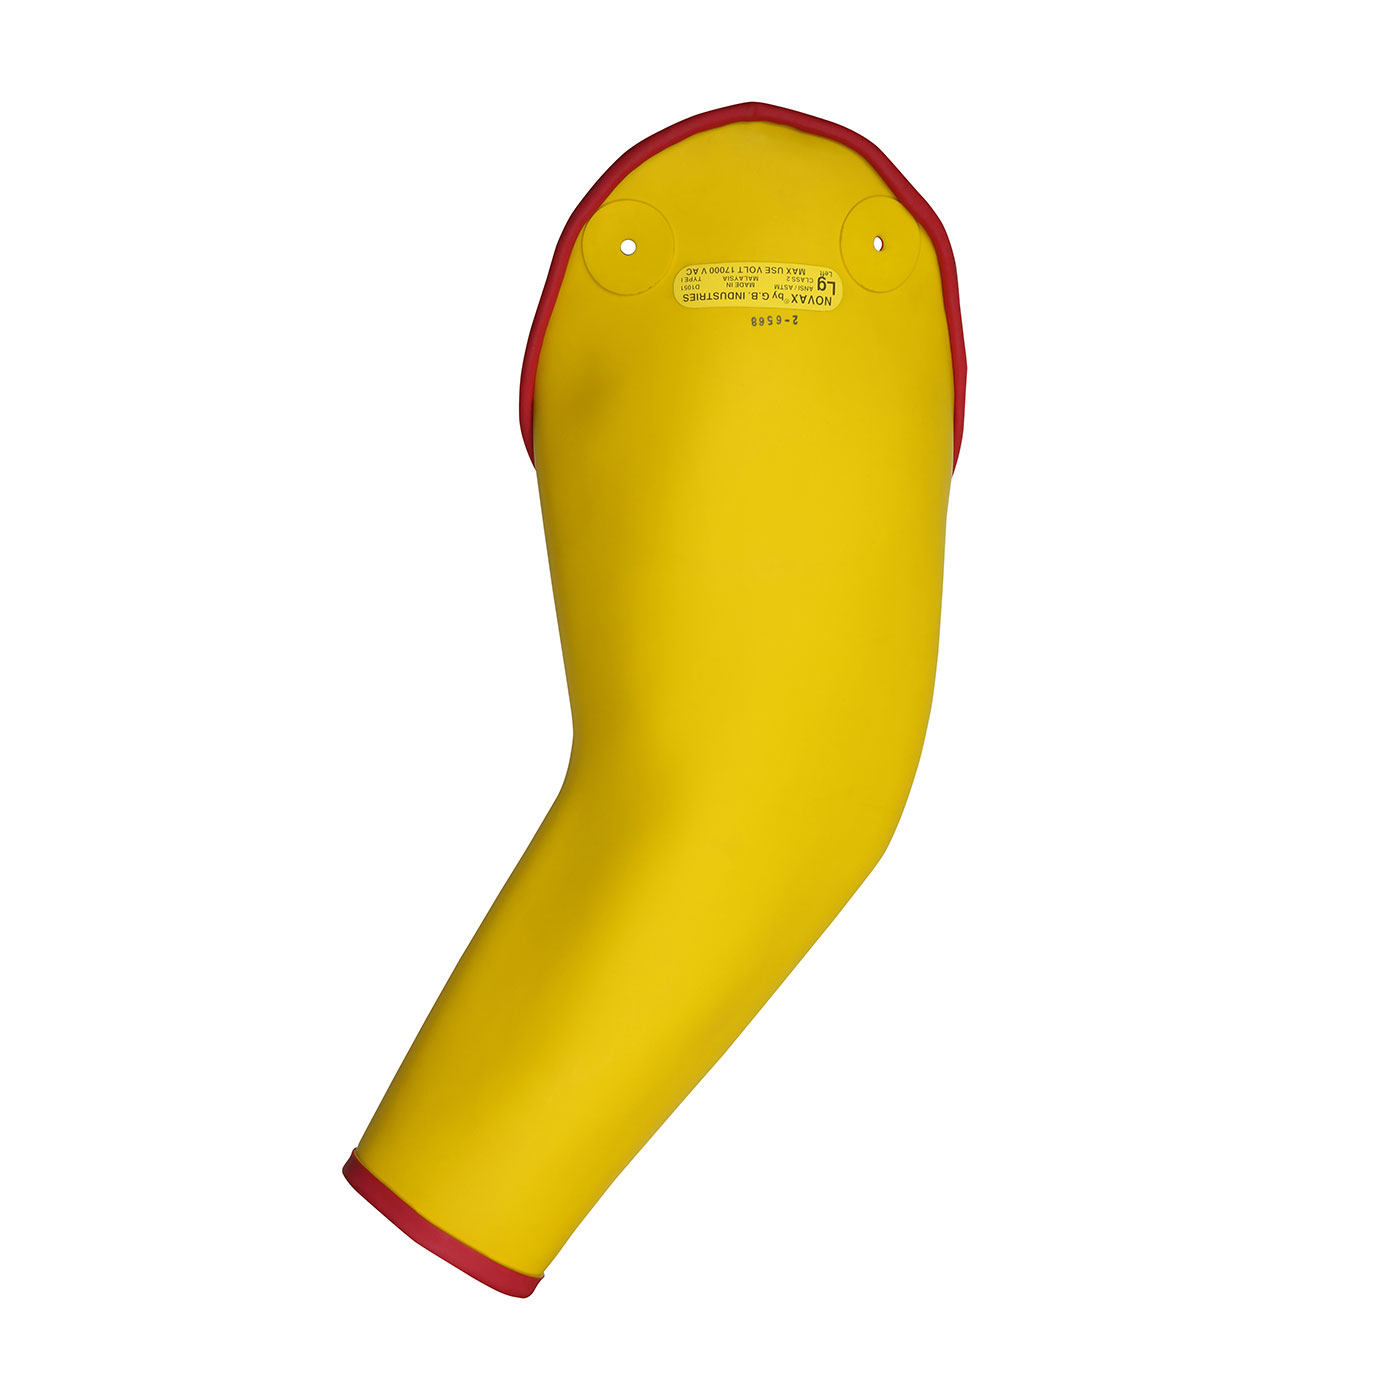 #199-2 PIP® Novax® Class 2 Electrical Rated Rubber Insulating Sleeve - yellow color